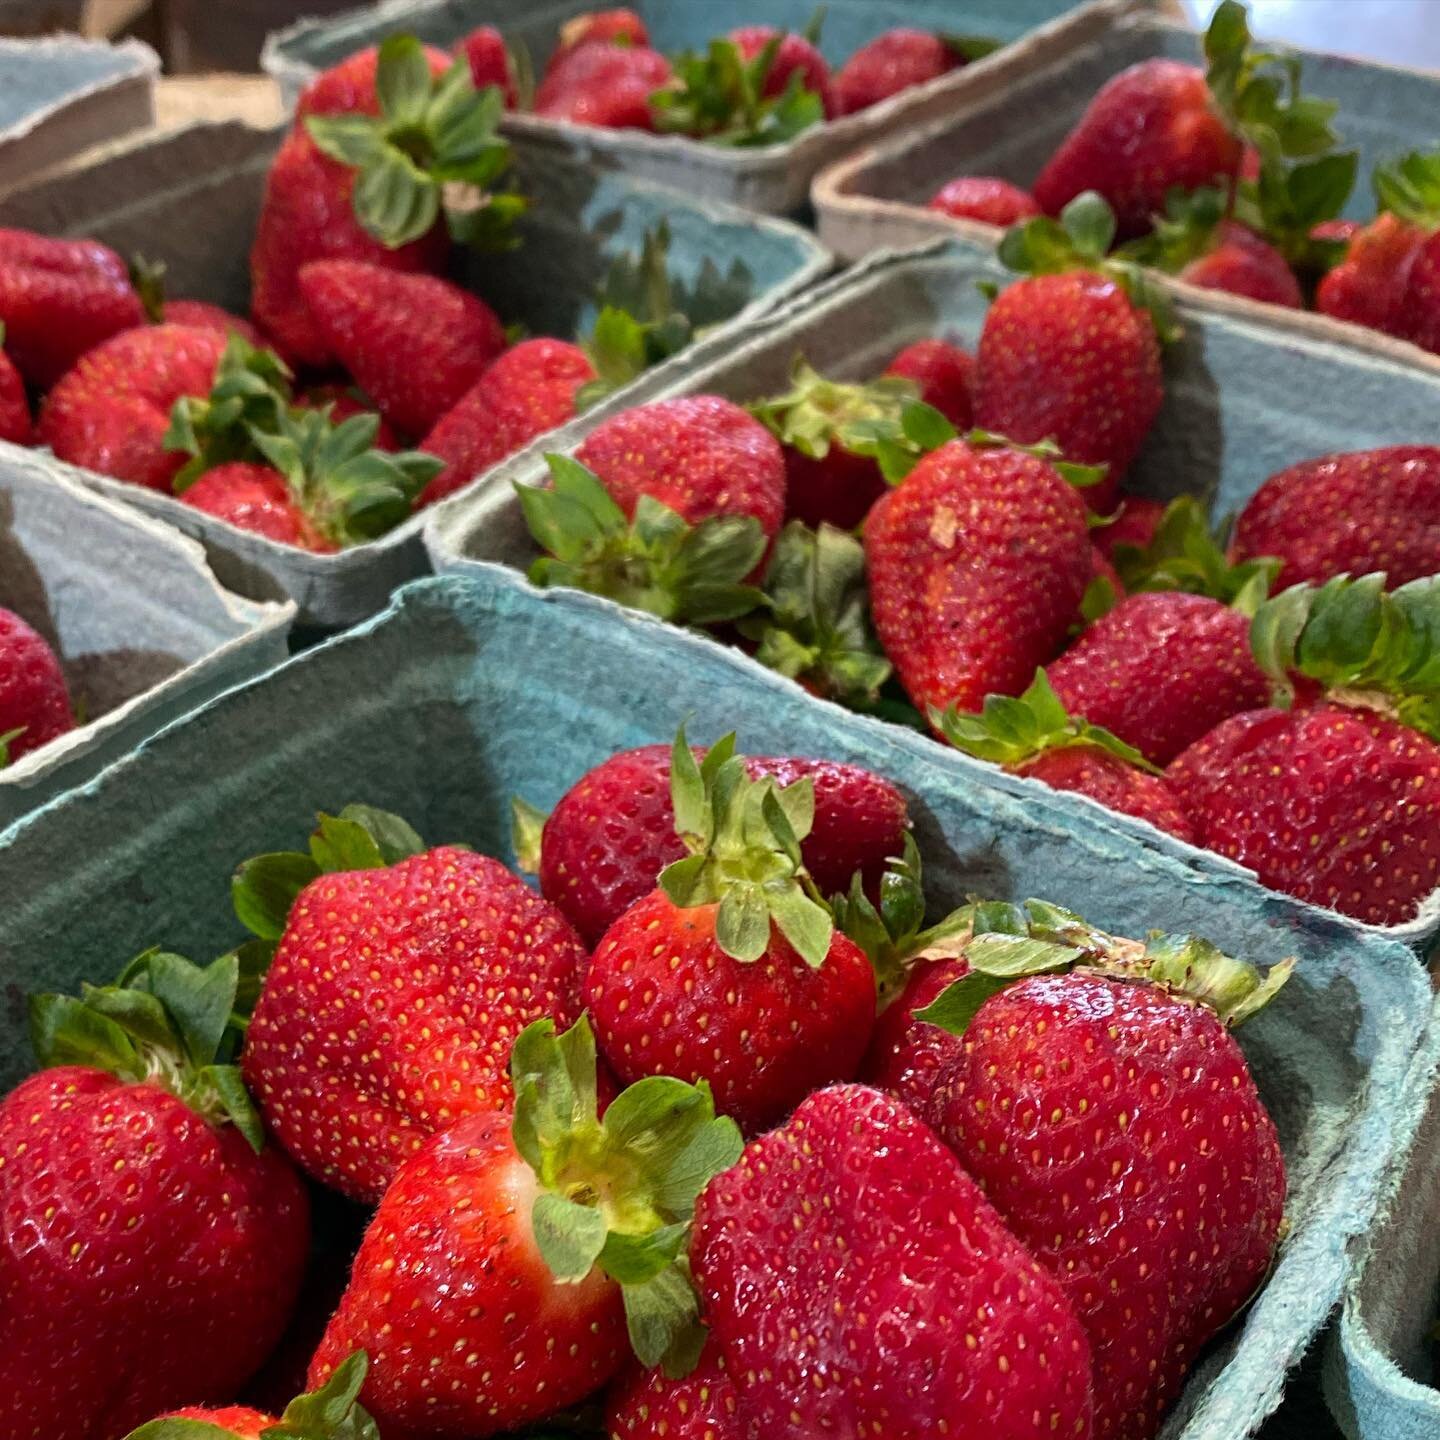 🍓🍓Strawberries are back in today! 

#gatherinspirecultivategrow